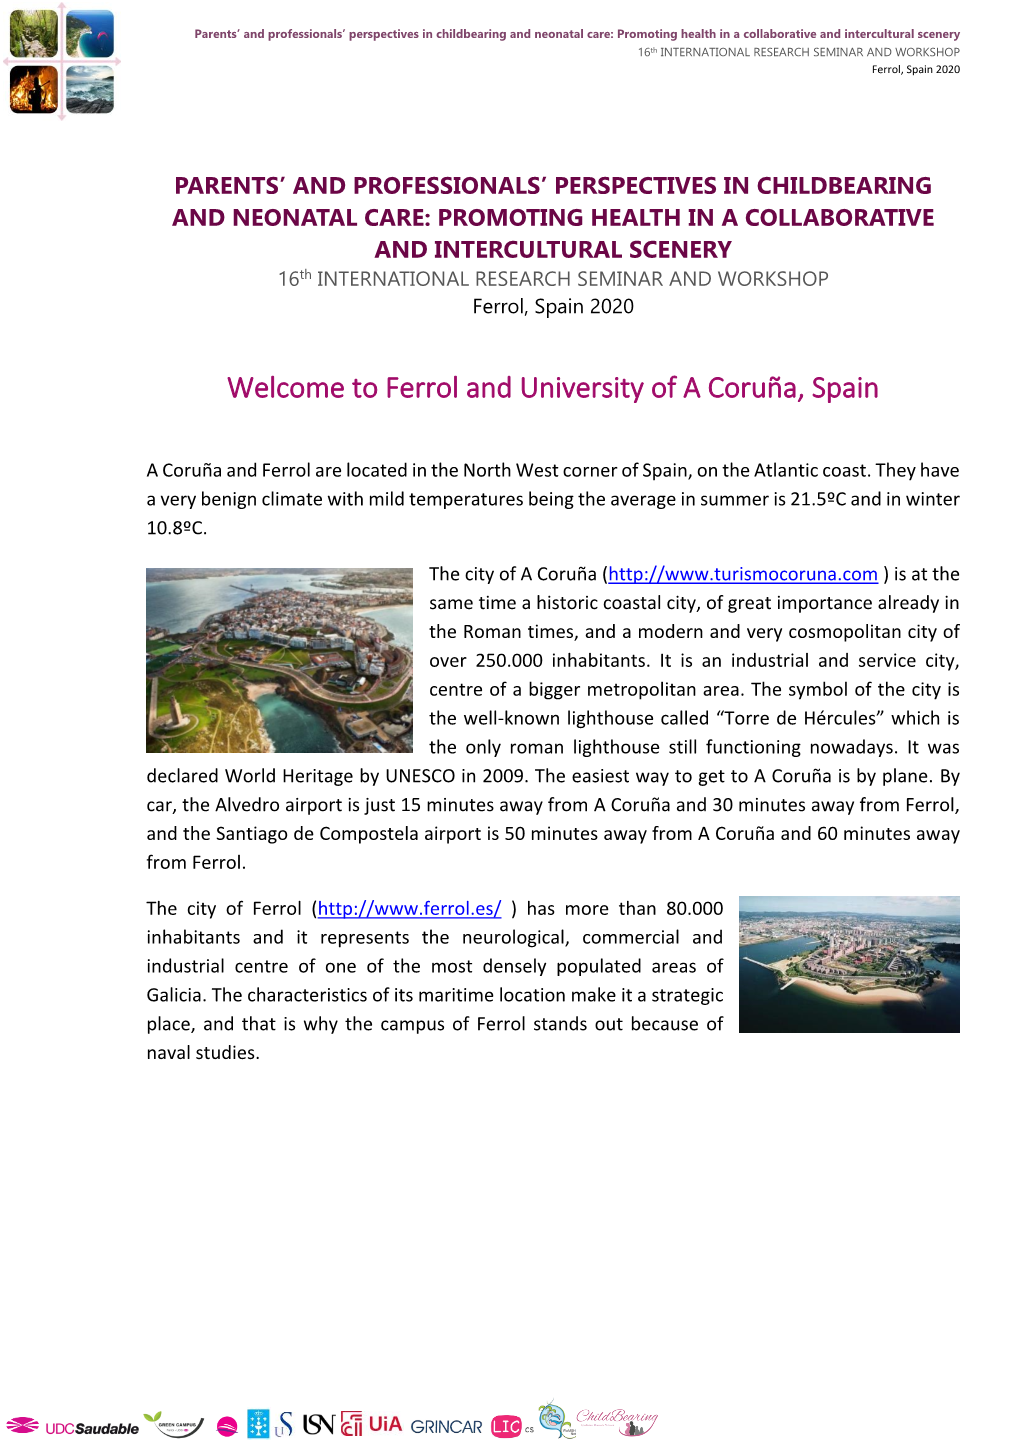 Welcome to Ferrol and University of a Coruña, Spain